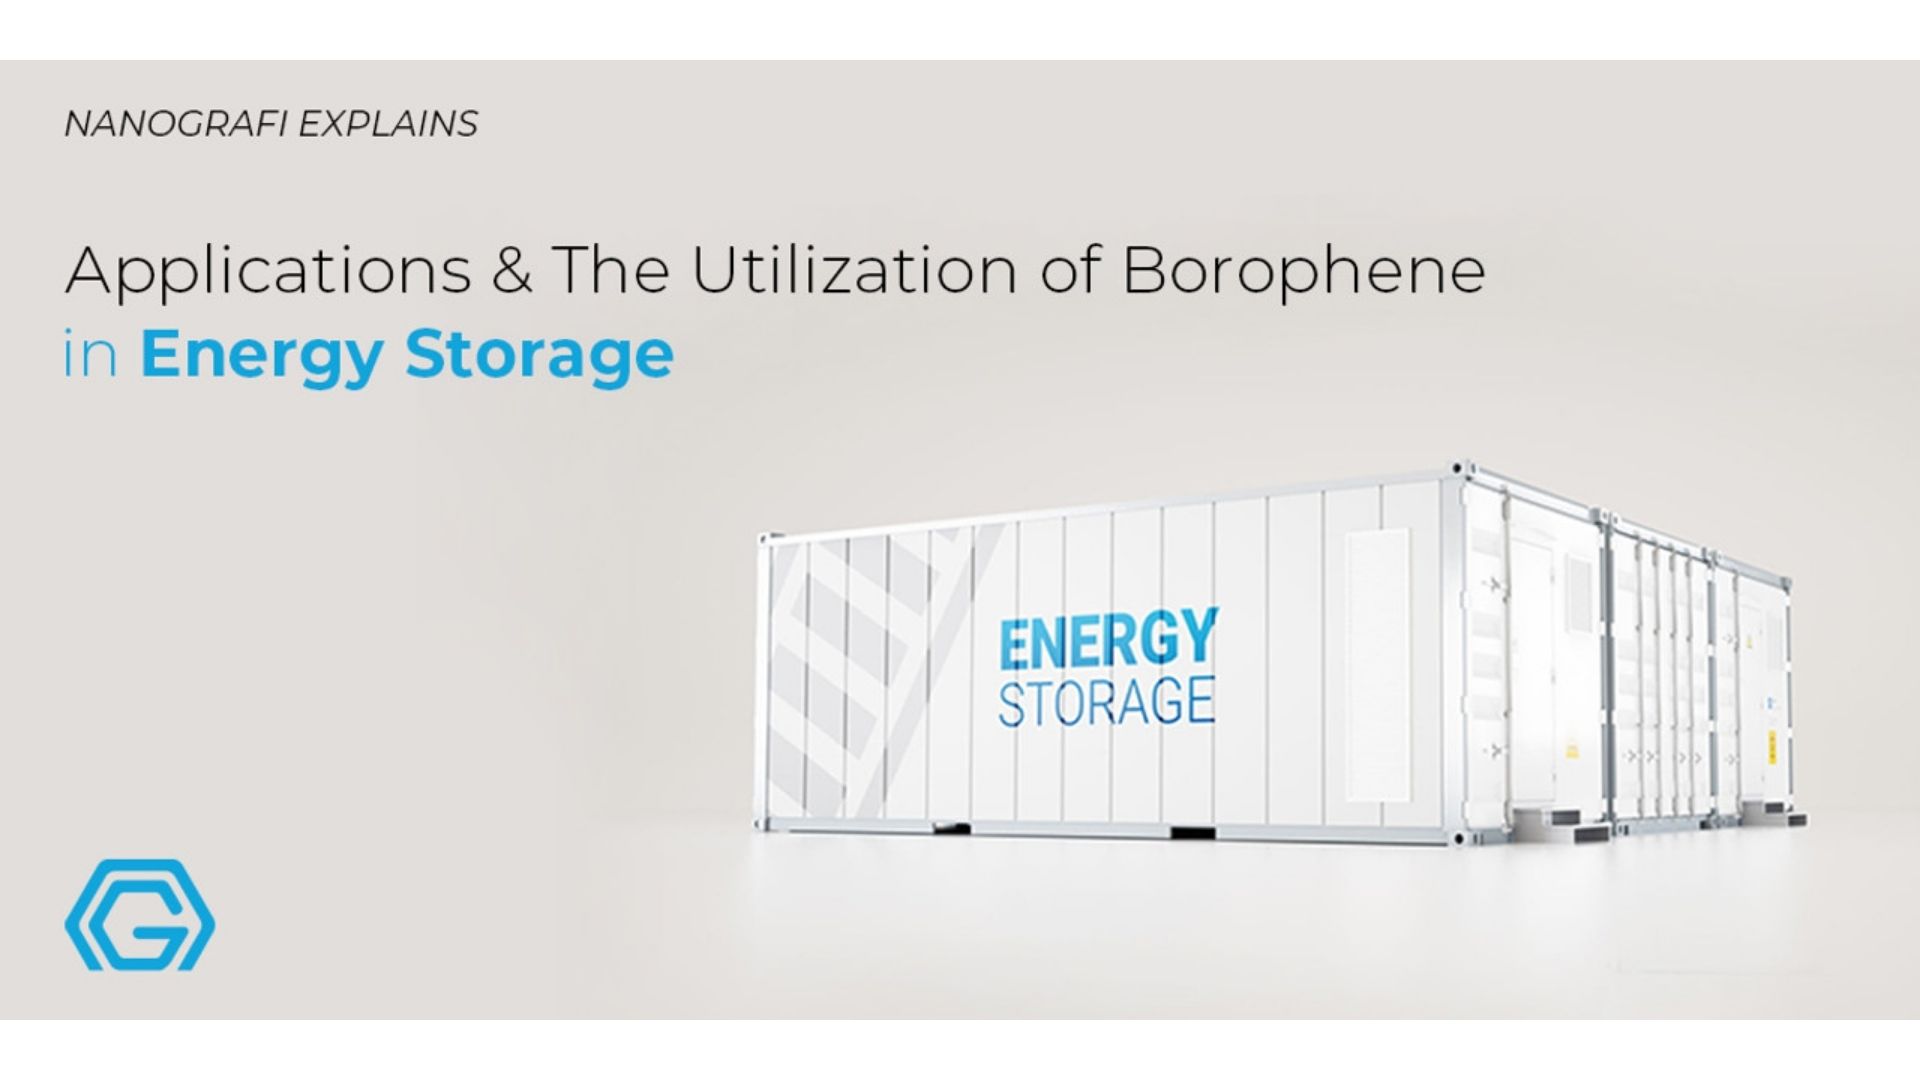 Applications and utilizations of borophene in energy storage